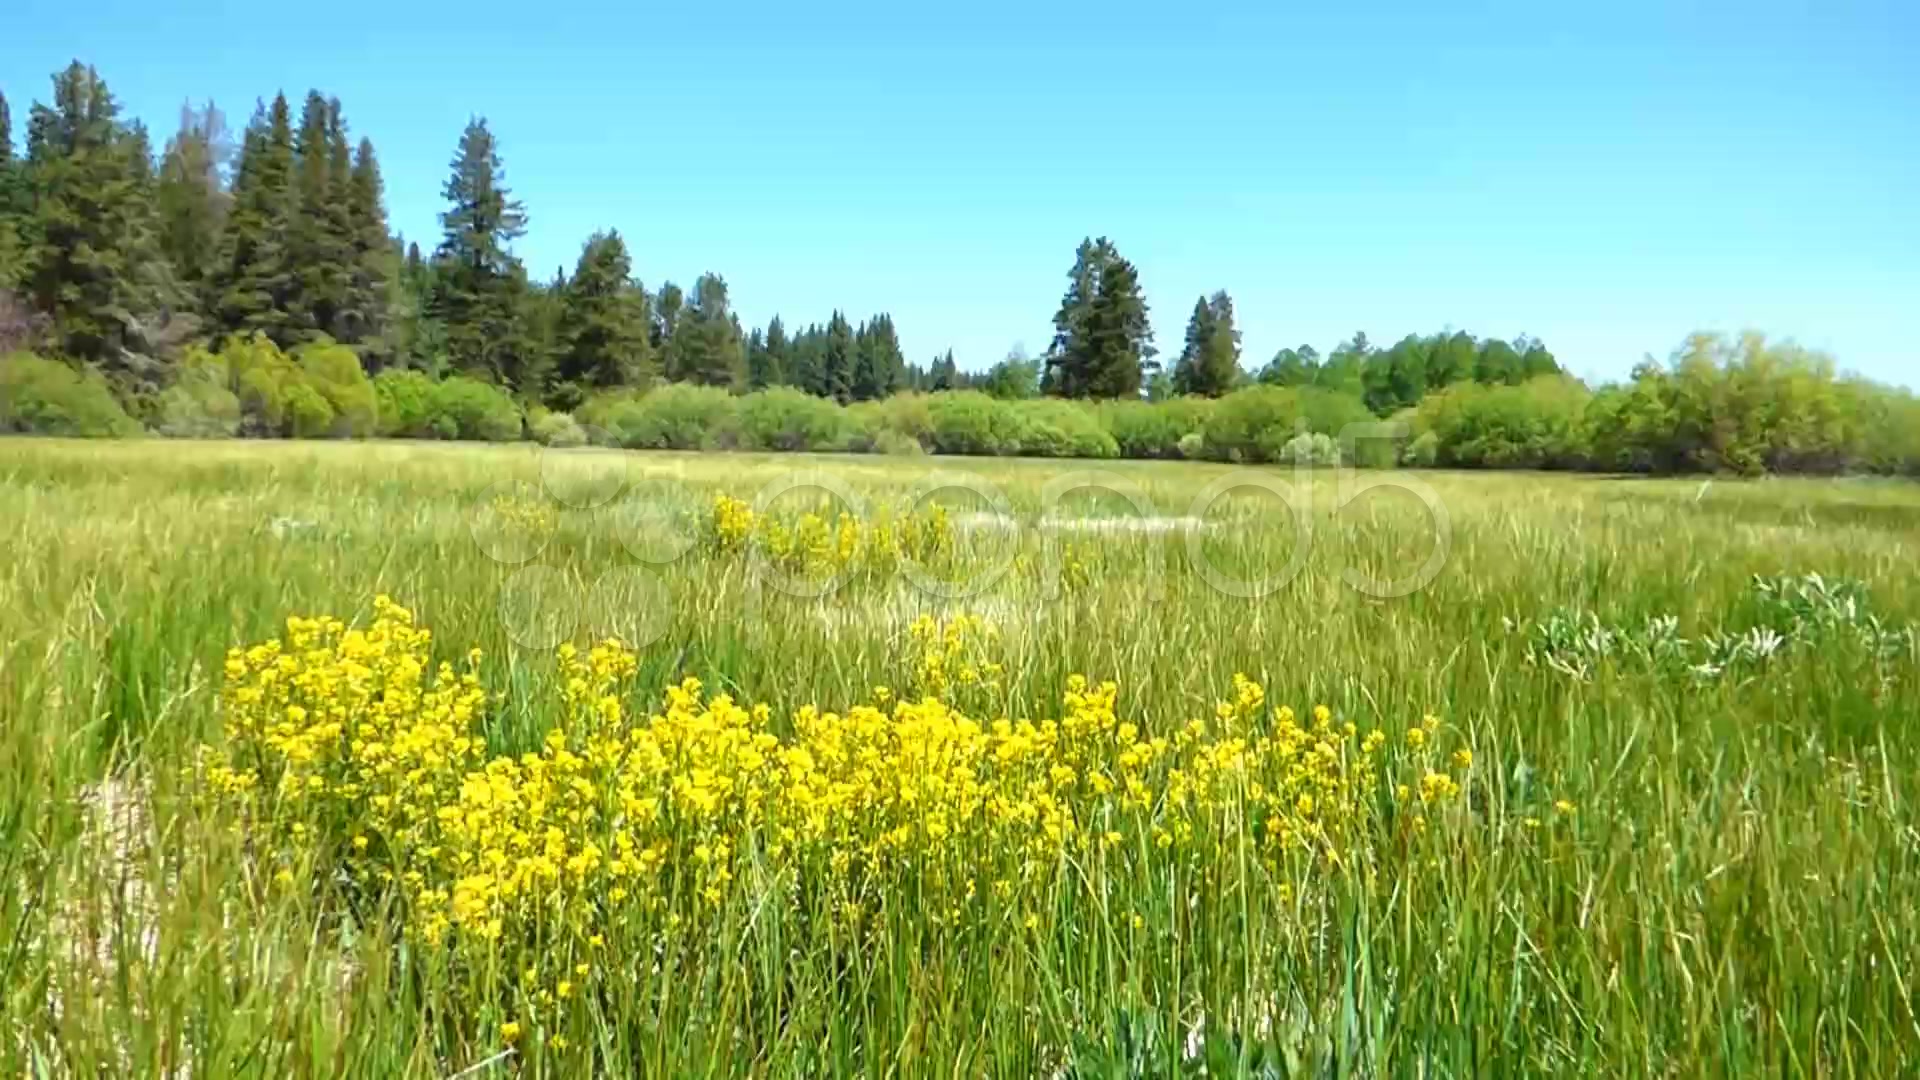 Waving Grass and Yellow Meadow Flowers ~ Clip #39387112